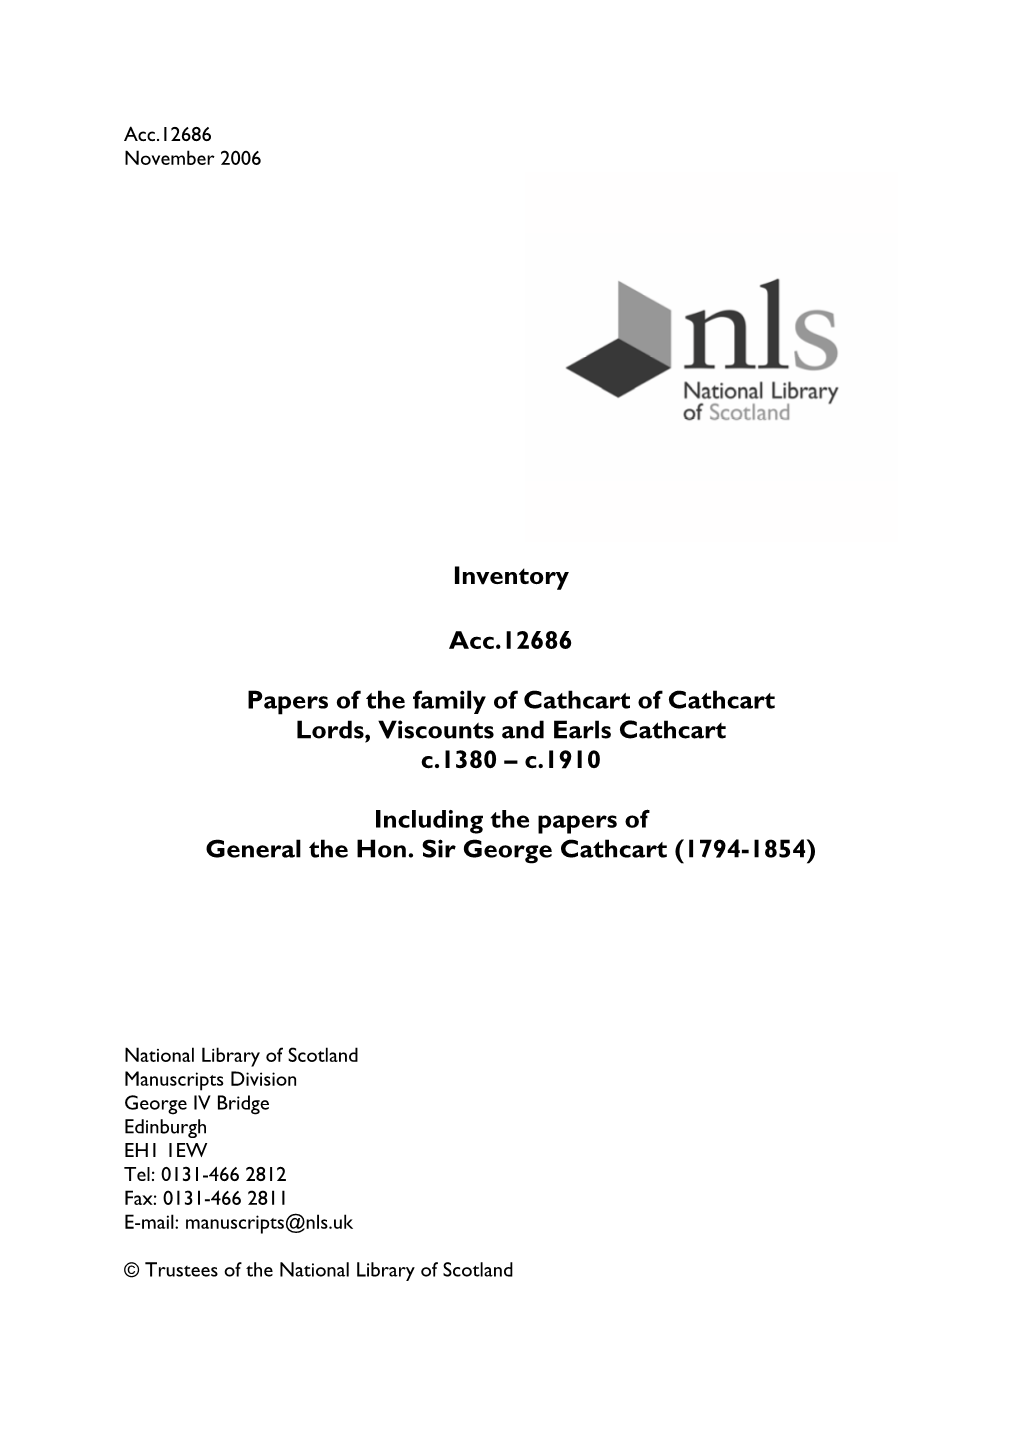 Inventory Acc.12686 Papers of the Family of Cathcart of Cathcart Lords